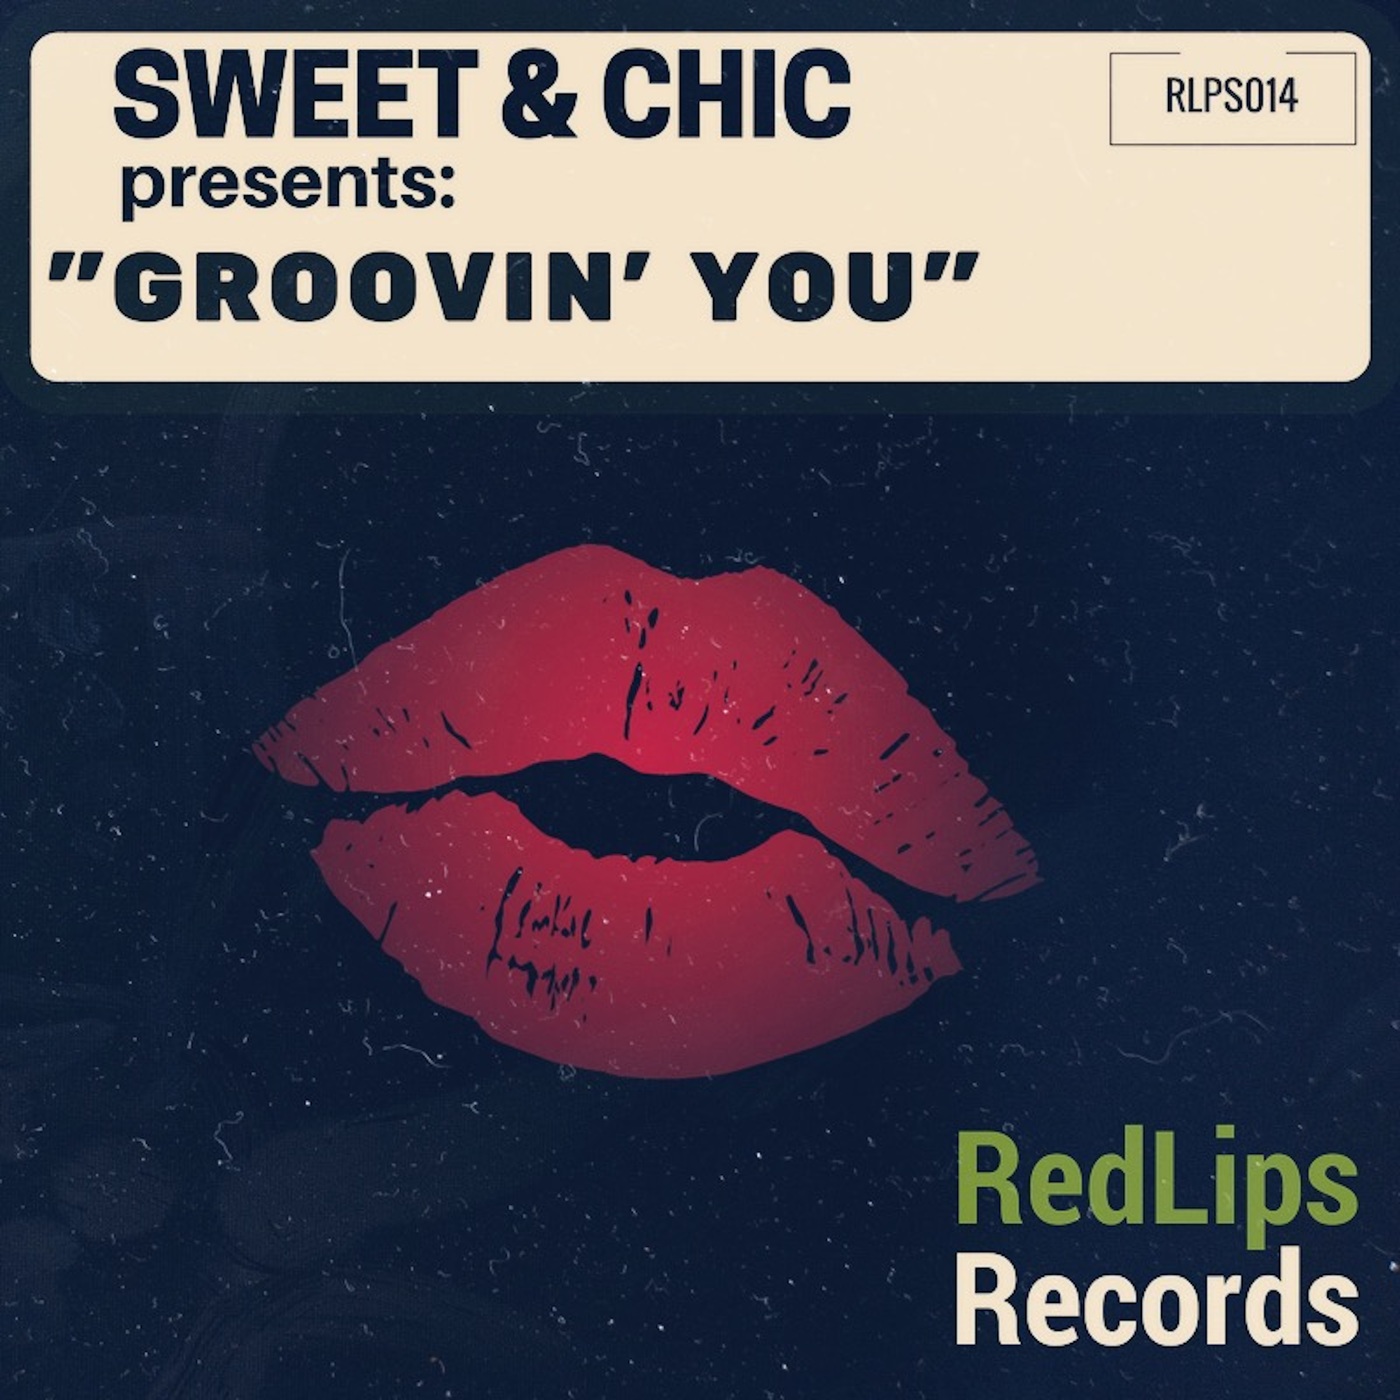 Sweet & Chic - Groovin' You / Red Lips Records